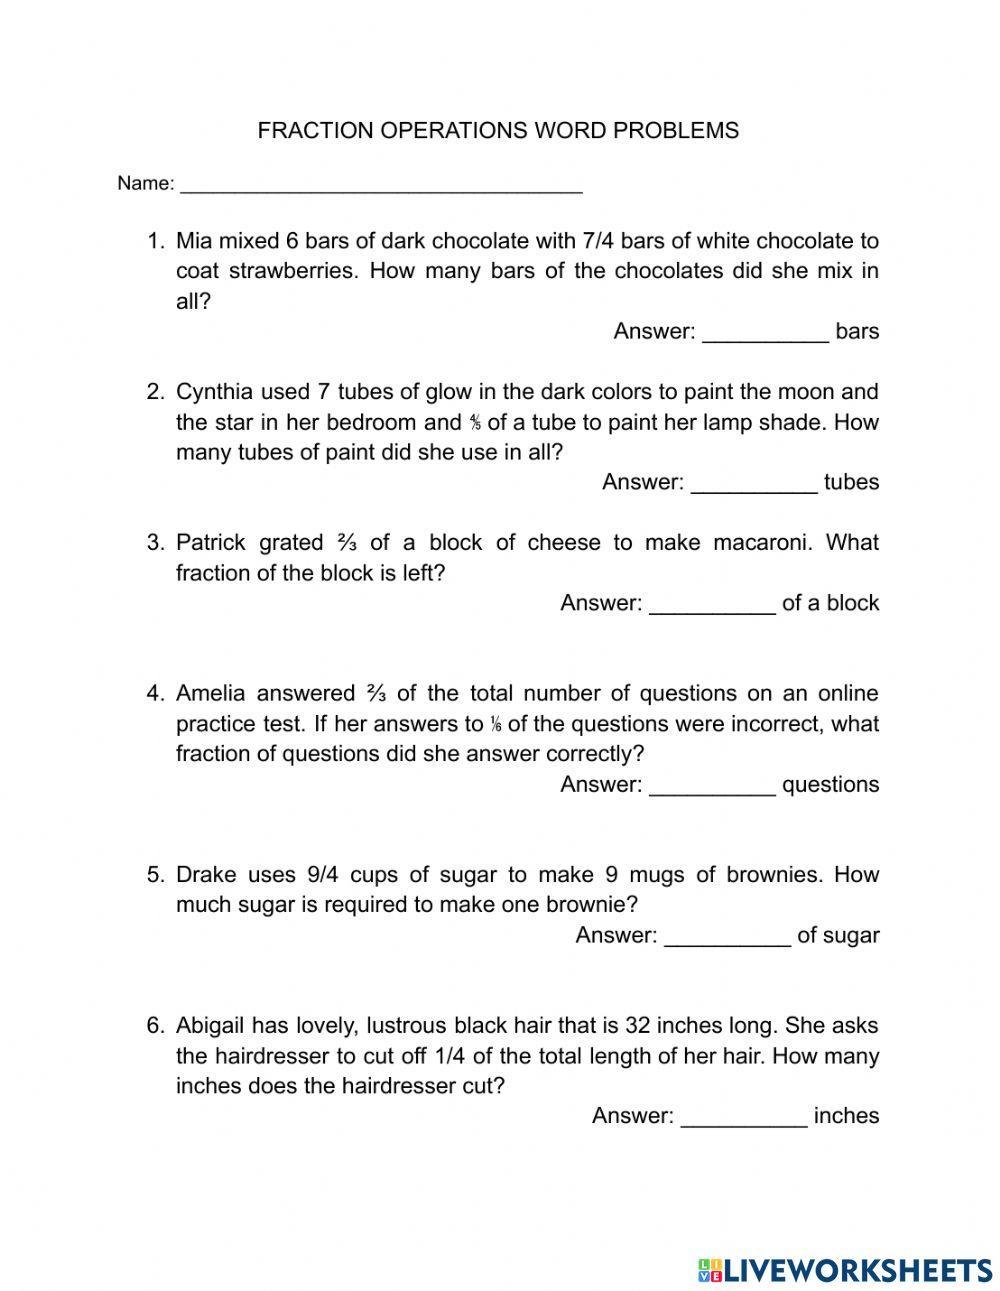 Fraction operations word problems